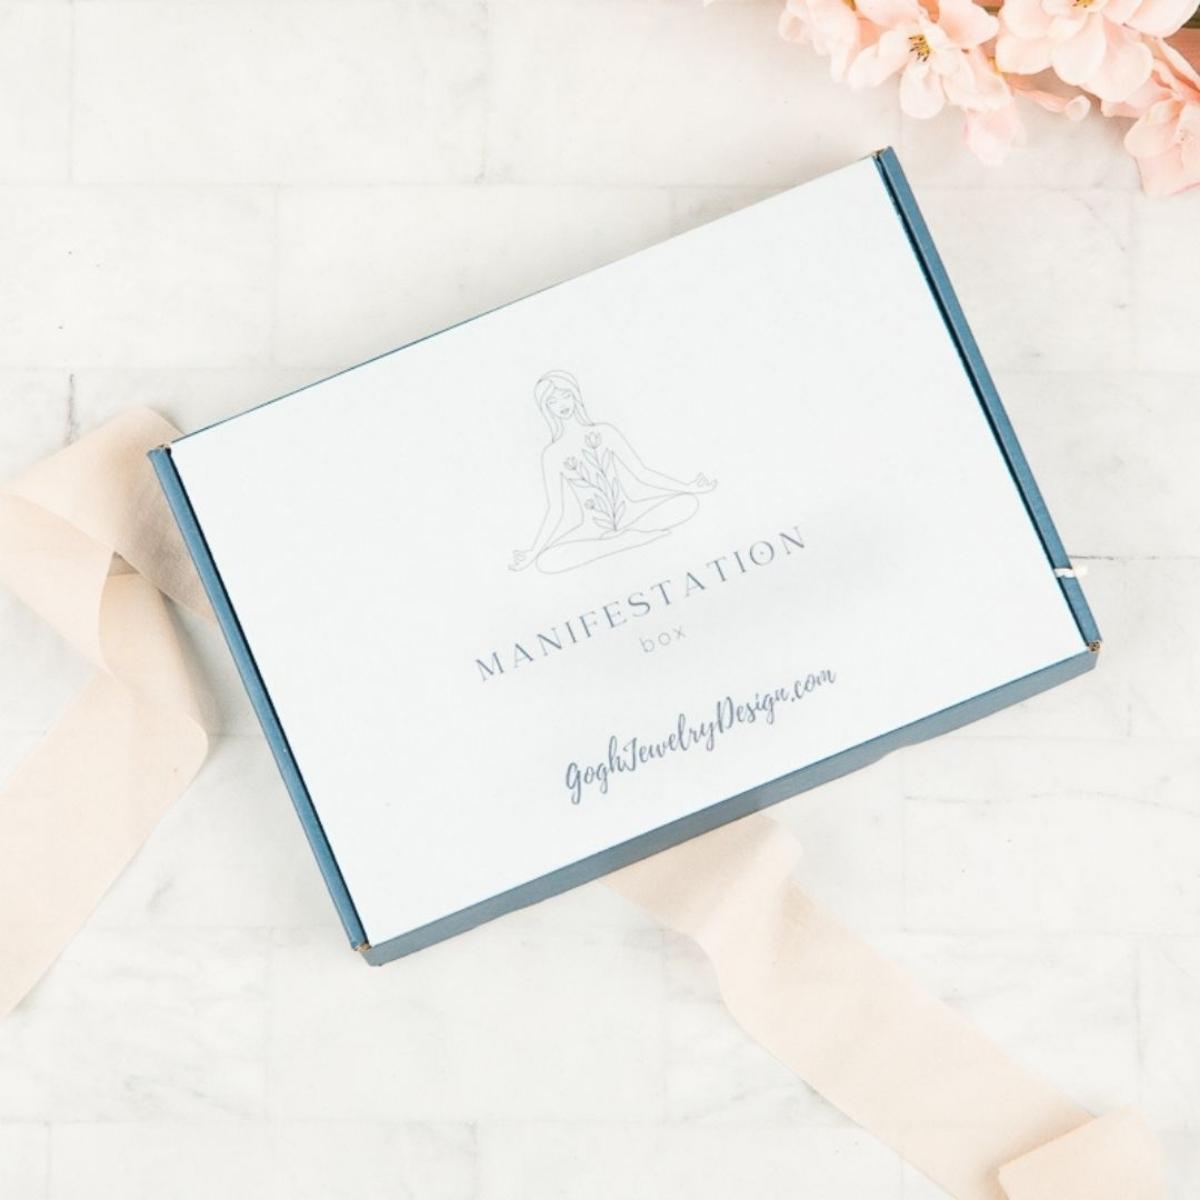 manifest the life you want to live with this manifestation Box Subscription